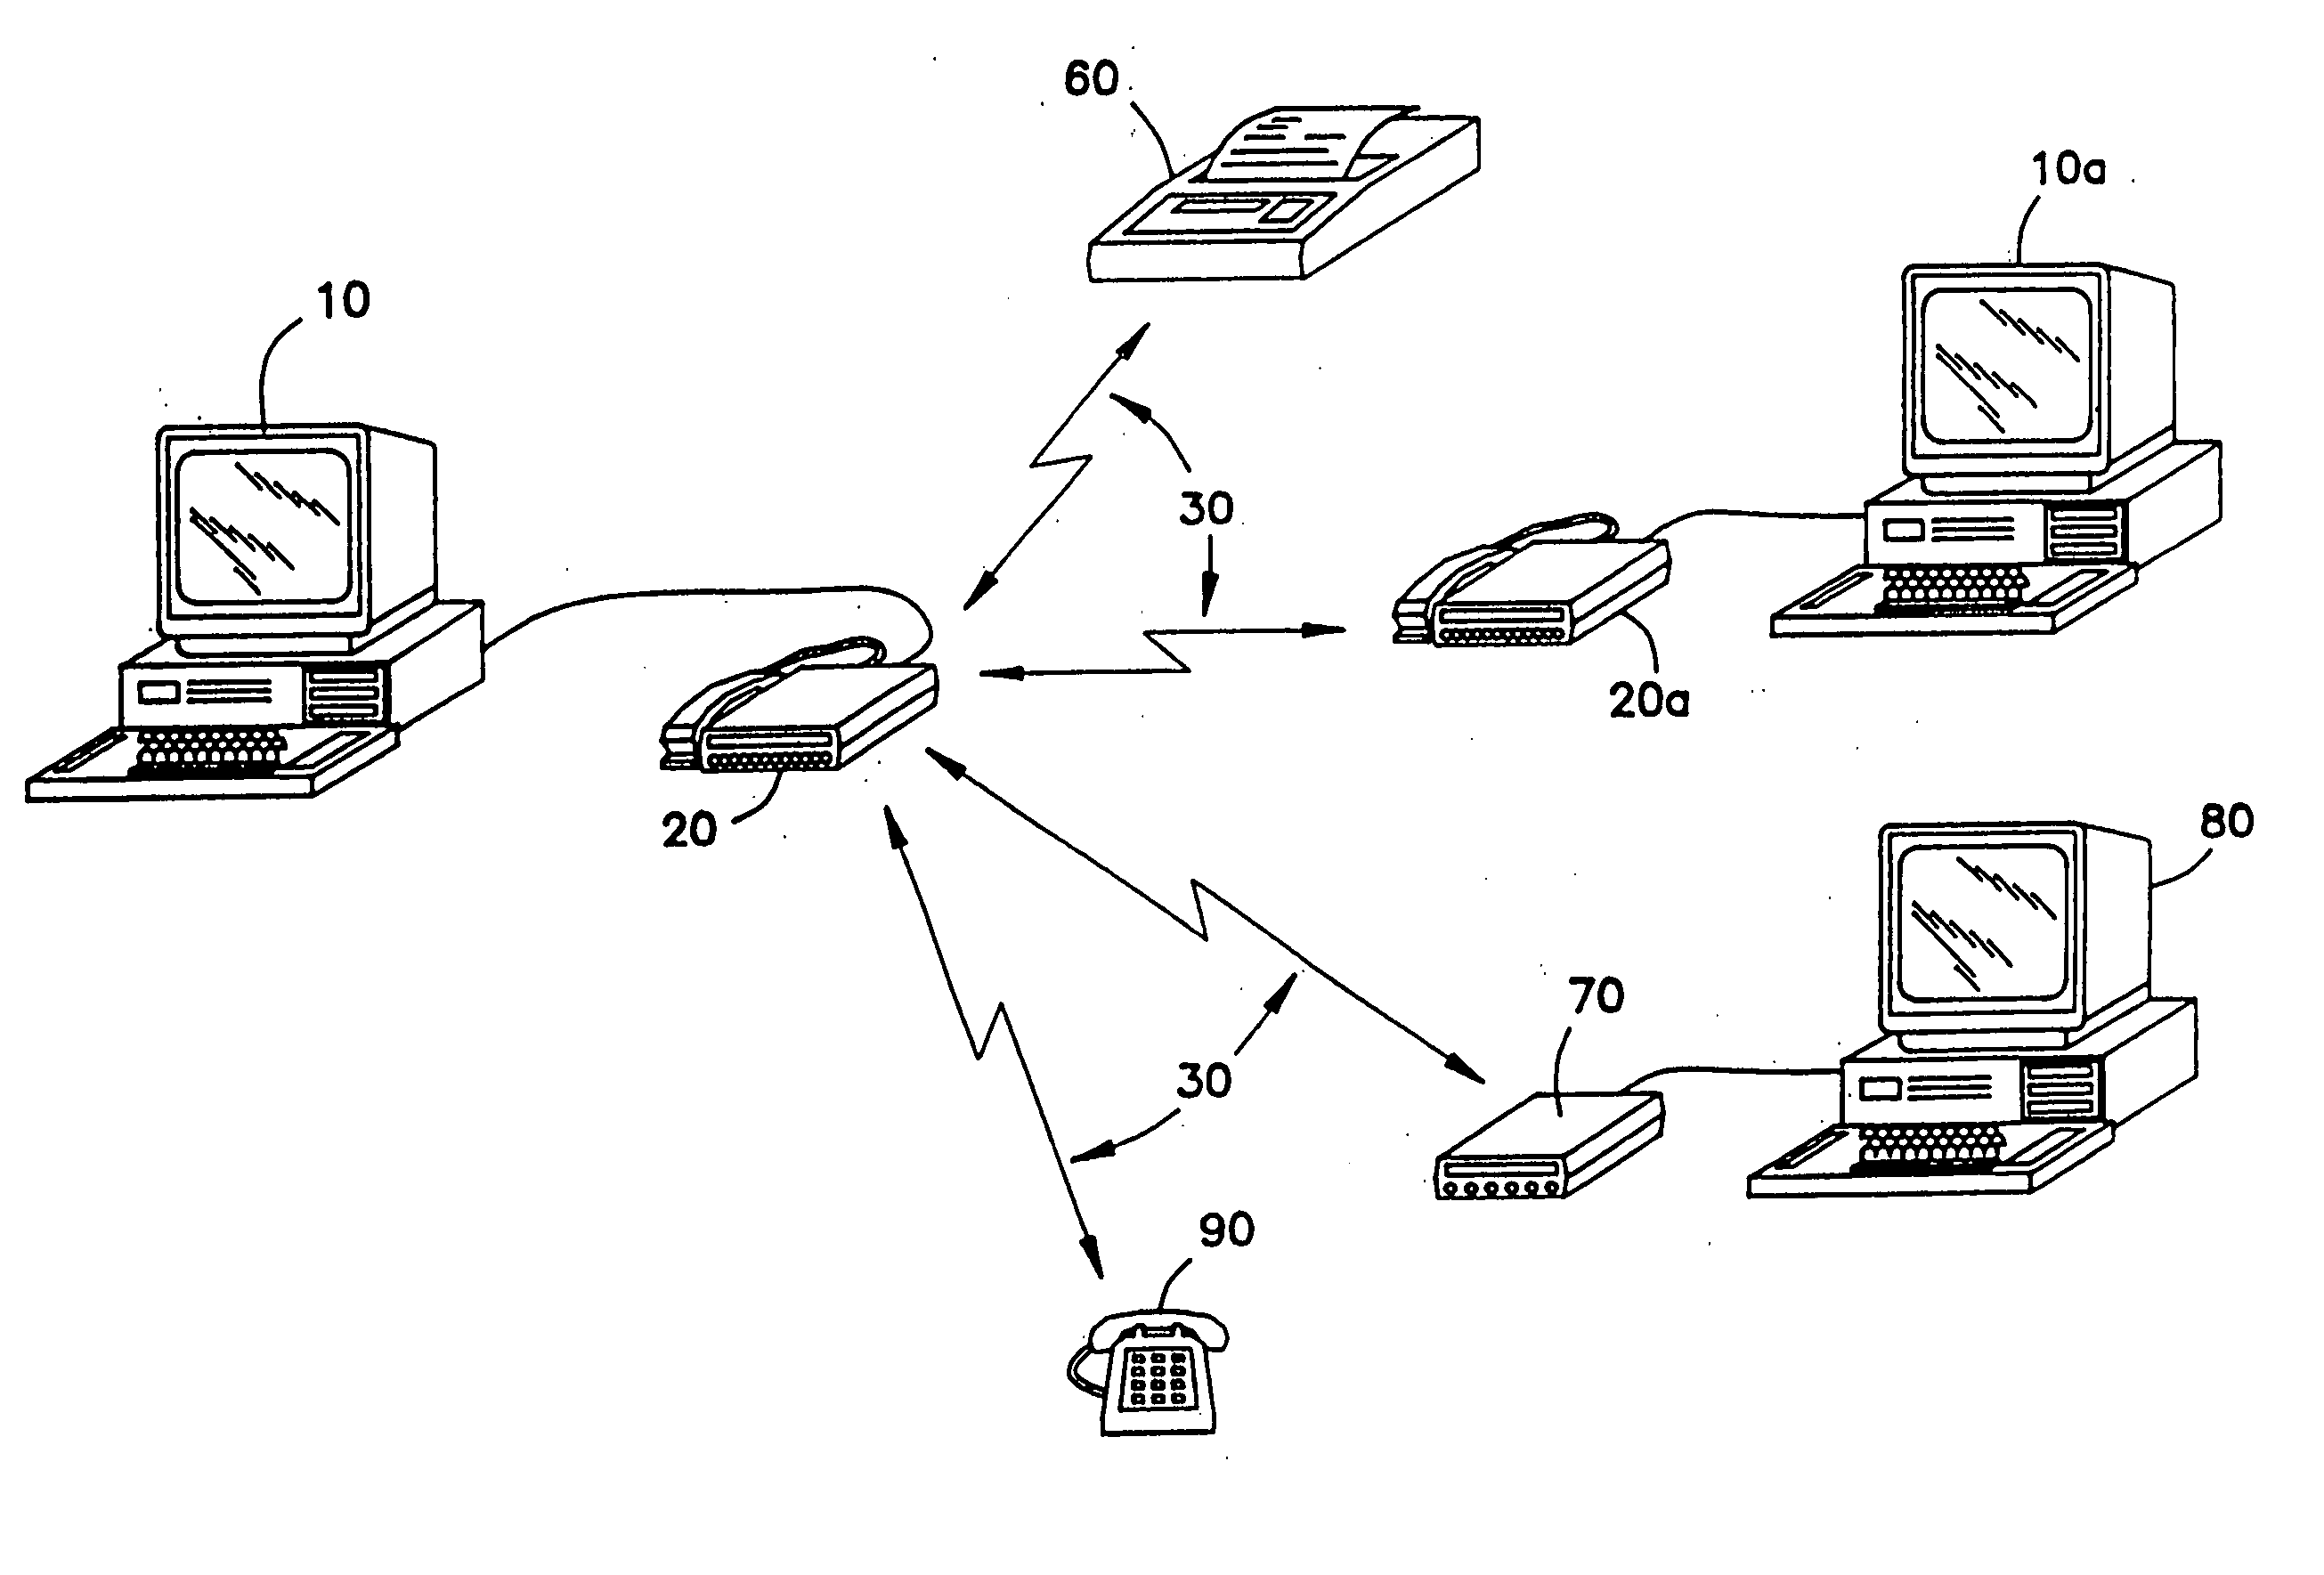 Computer-based multifunctional personal communication system with caller ID